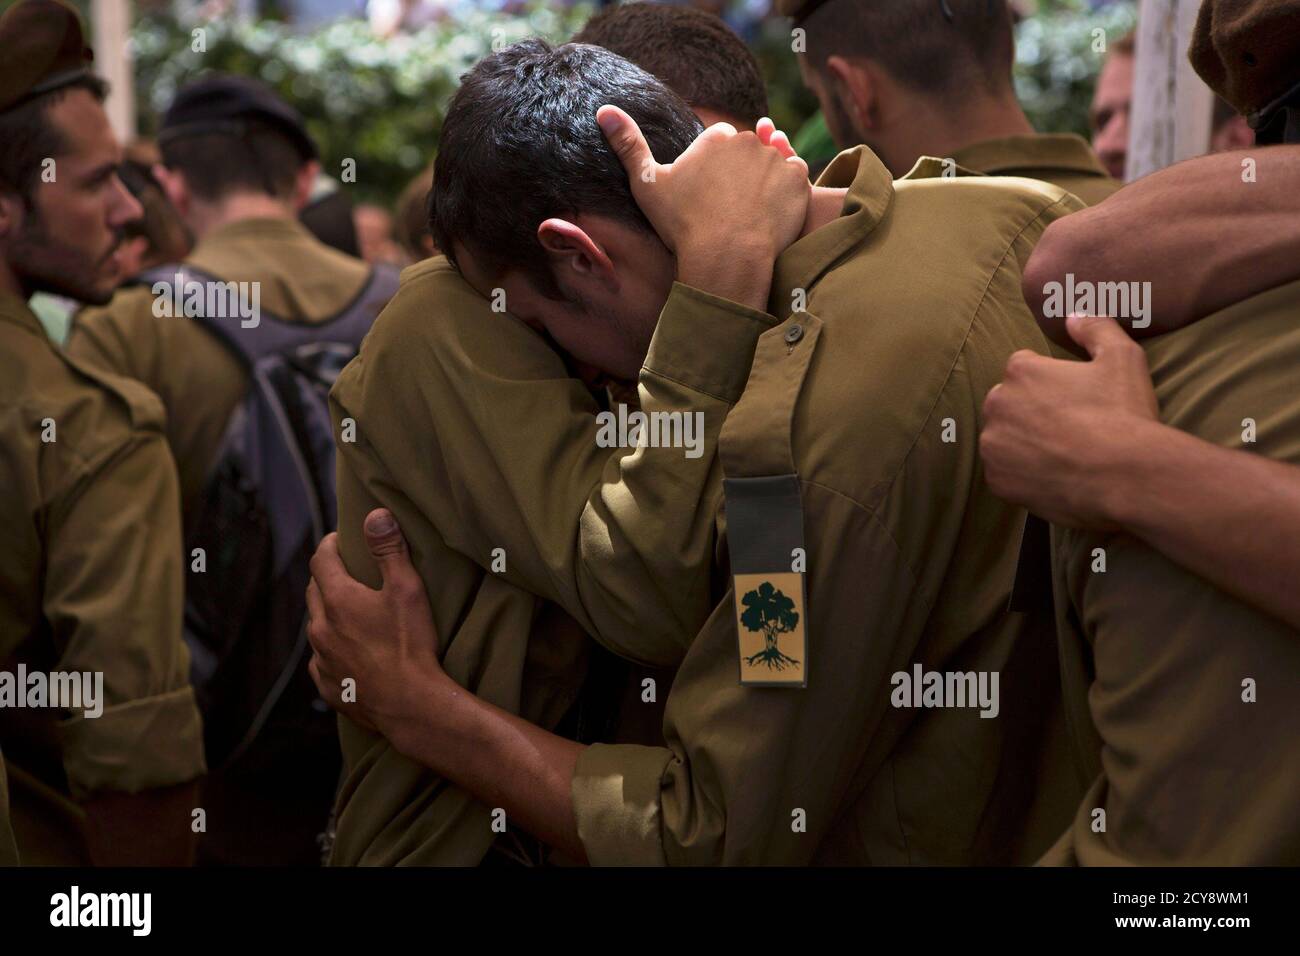 Israeli soldiers from the Golani Brigade mourn during the funeral for their fallen comrade Max Steinberg at Mount Herzl military cemetery in Jerusalem July 23, 2014. Steinberg, a 23 year-old American from California's San Fernando Valley, was among 13 Israeli Defense Forces soldiers killed on Sunday during fighting in Gaza. REUTERS/Siegfried Modola (JERUSALEM - Tags: CONFLICT POLITICS CIVIL UNREST MILITARY TPX IMAGES OF THE DAY) Stock Photo